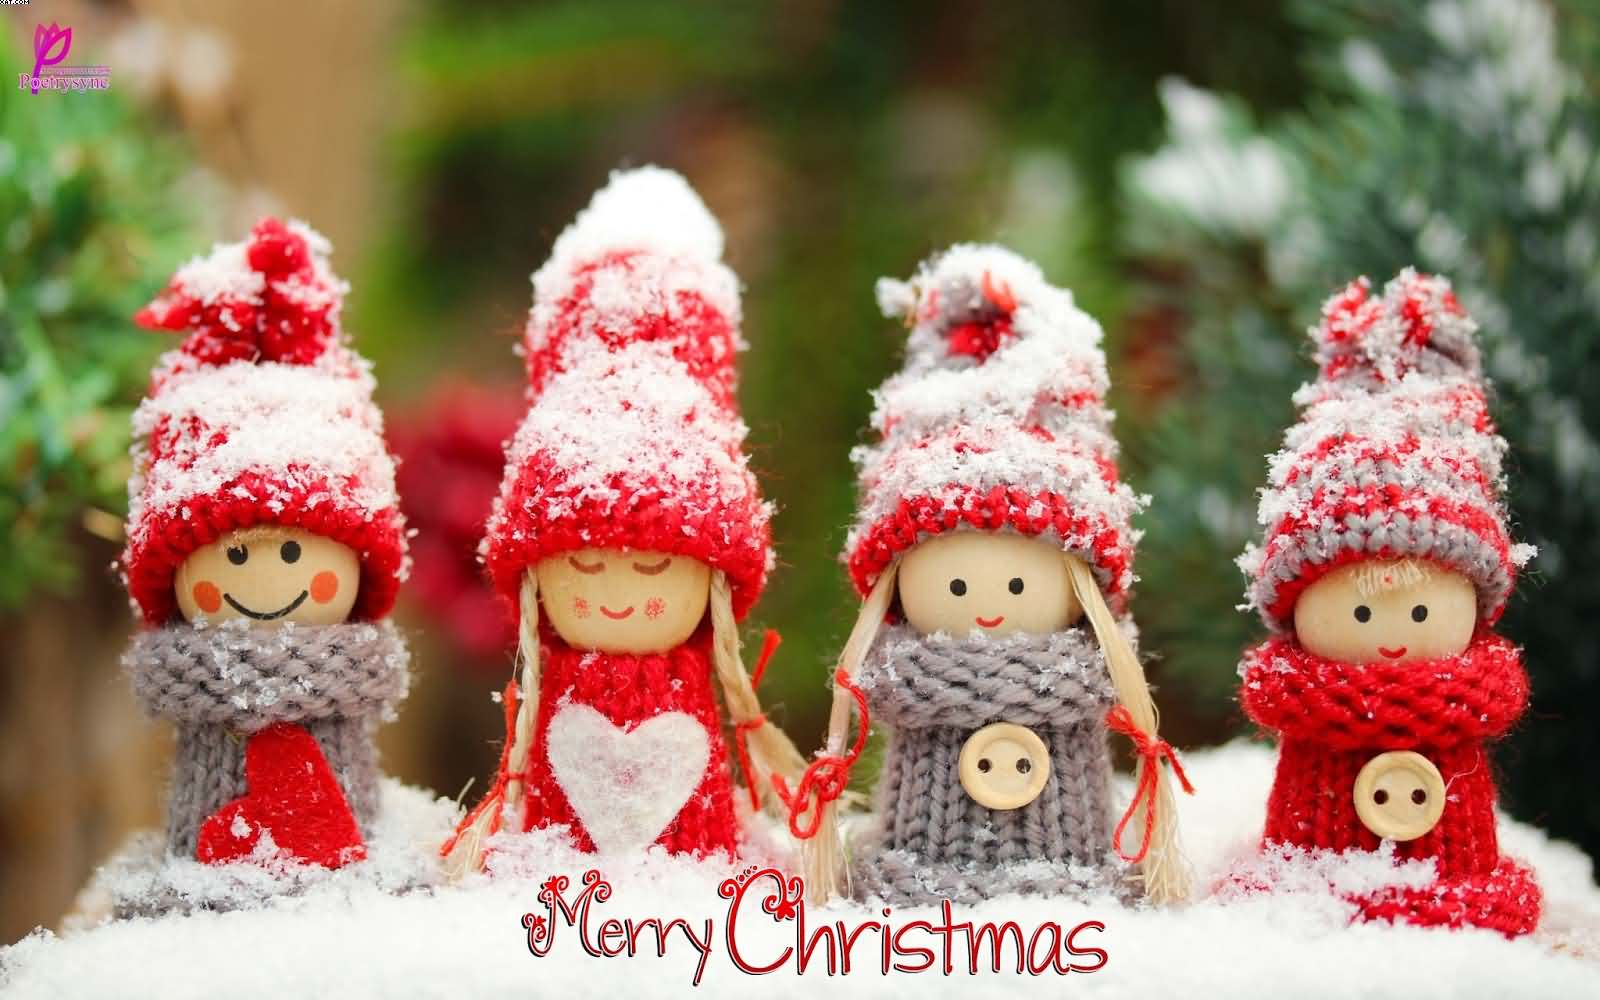 Merry Christmas wishes with beautiful dolls wallpaper